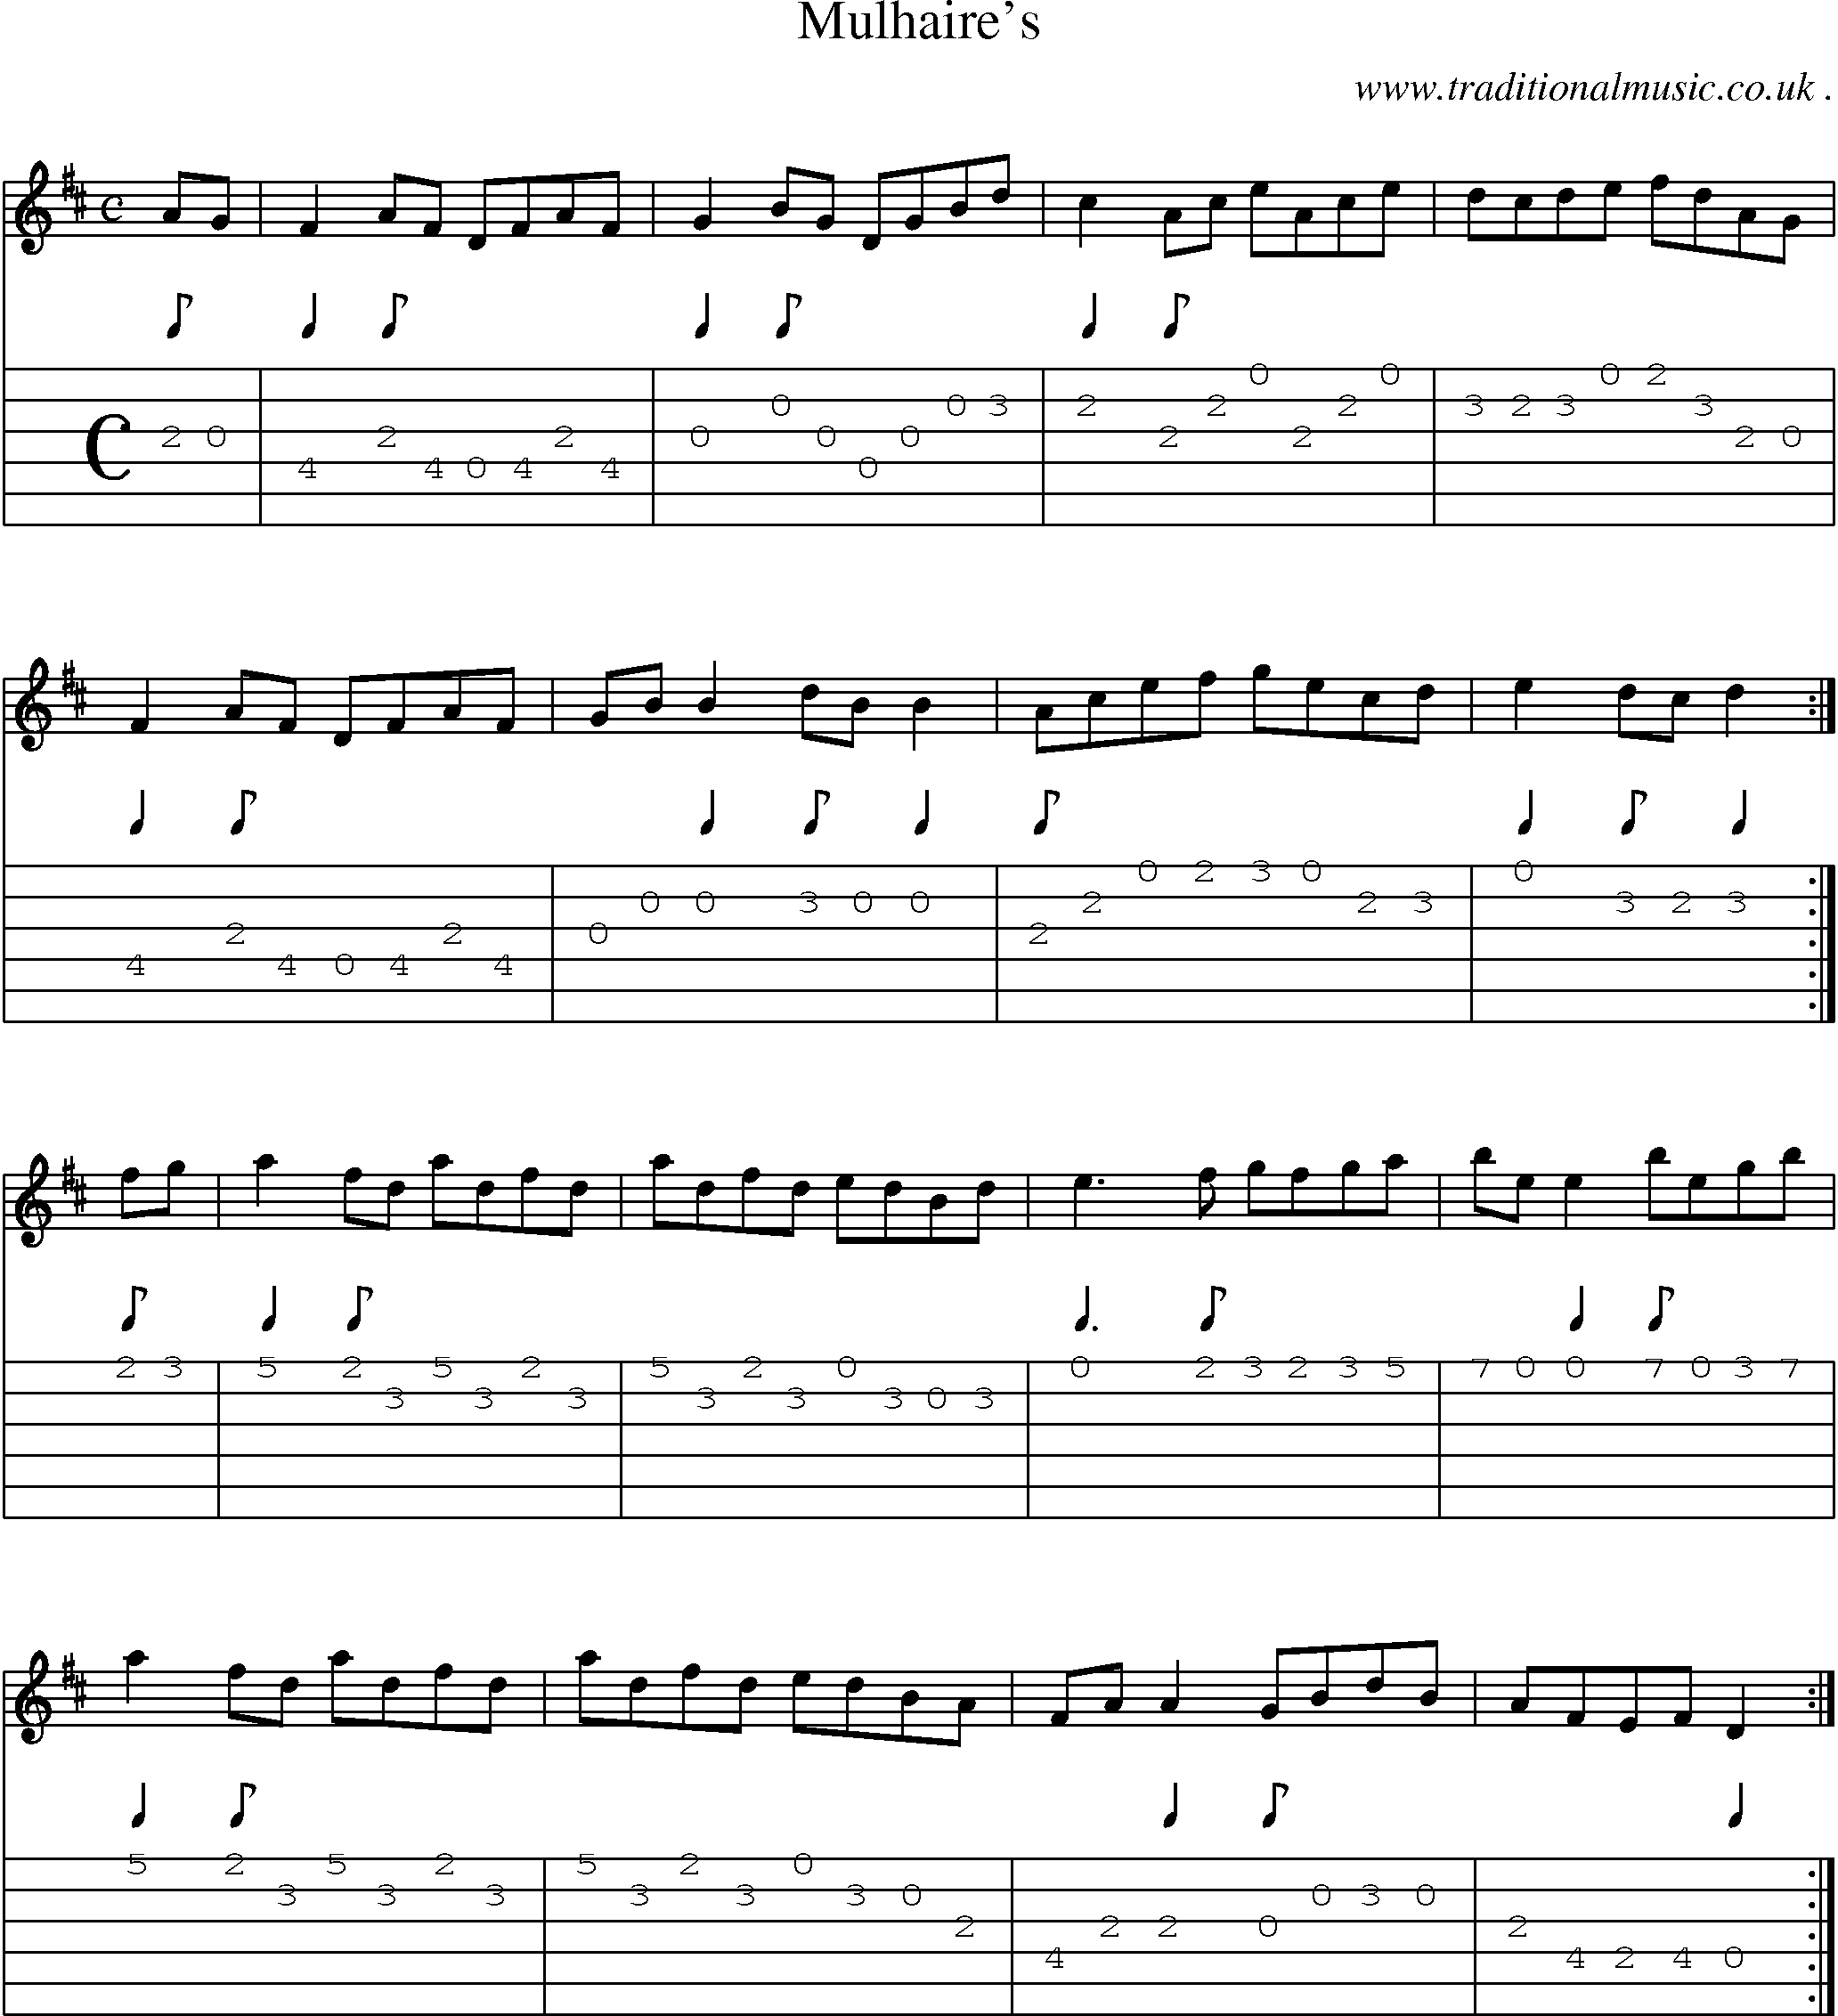 Sheet-Music and Guitar Tabs for Mulhaires